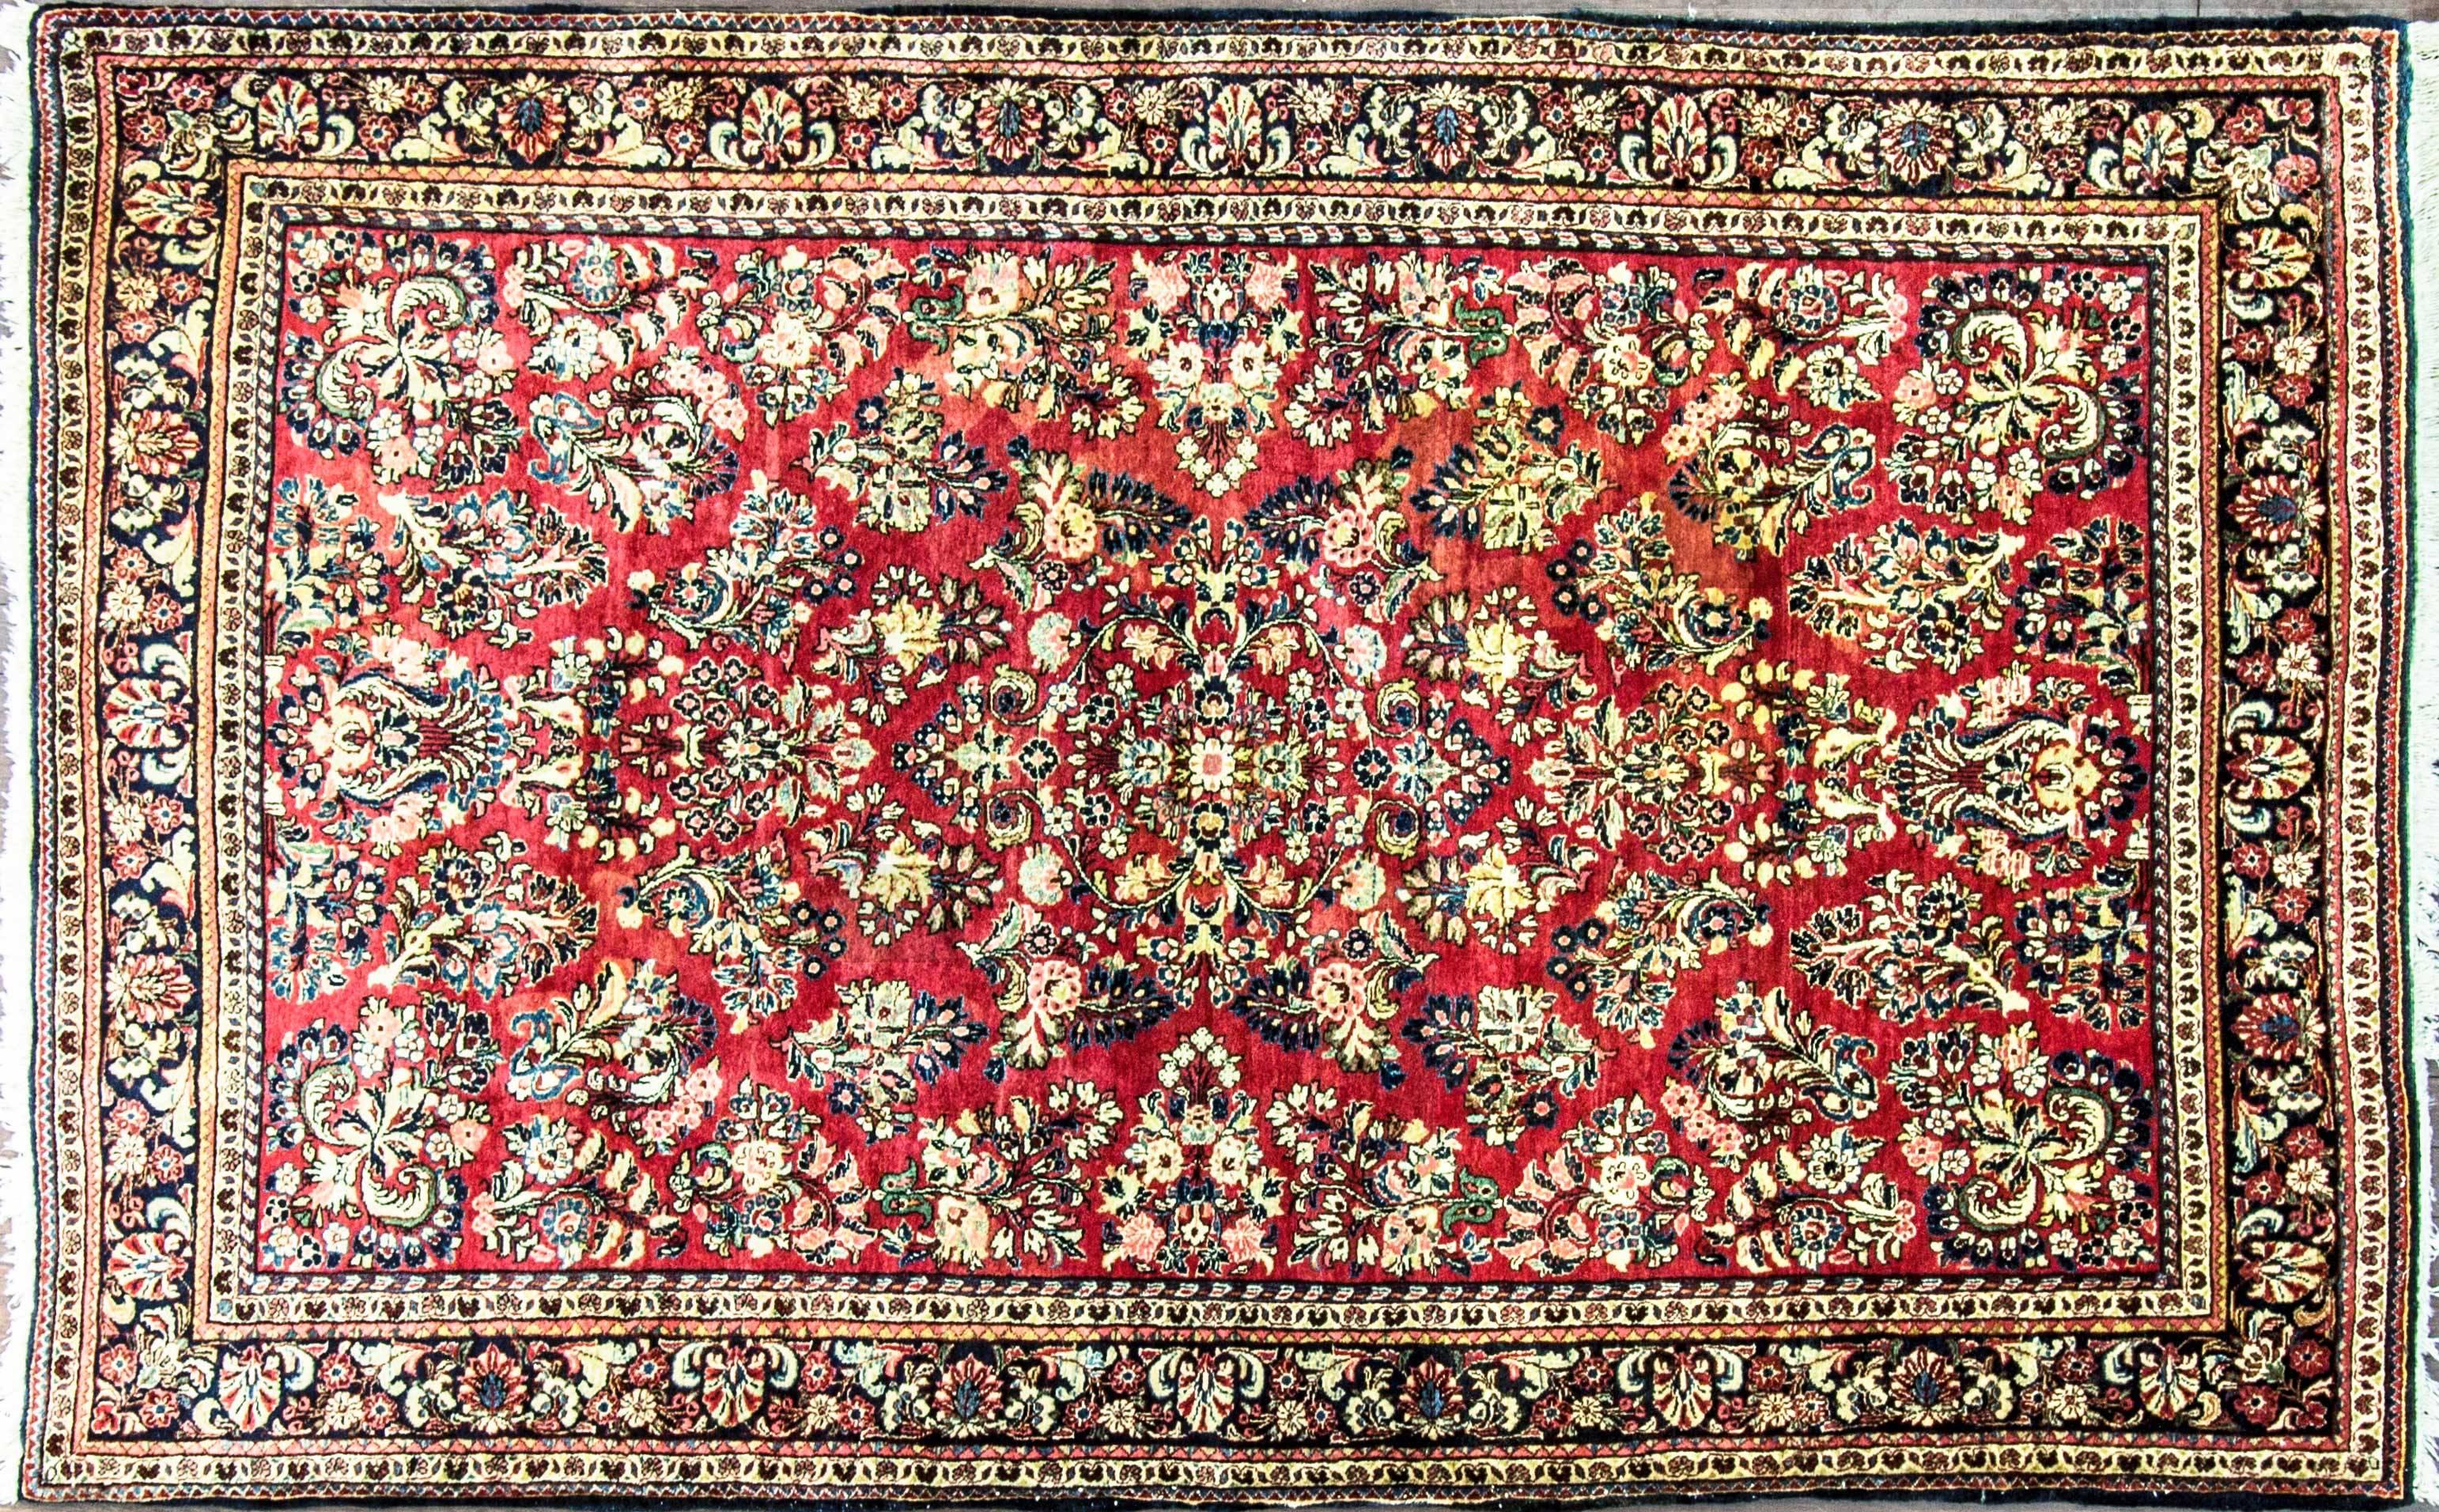 Persian Sarouk rug, circa 1930, Very fine and soft vegetable dye wool (not painted Sarouk) very high density of knots in excellent condition. A nice soft tone of red and blue background colors with symmetrical floral pattern.

 The materials are